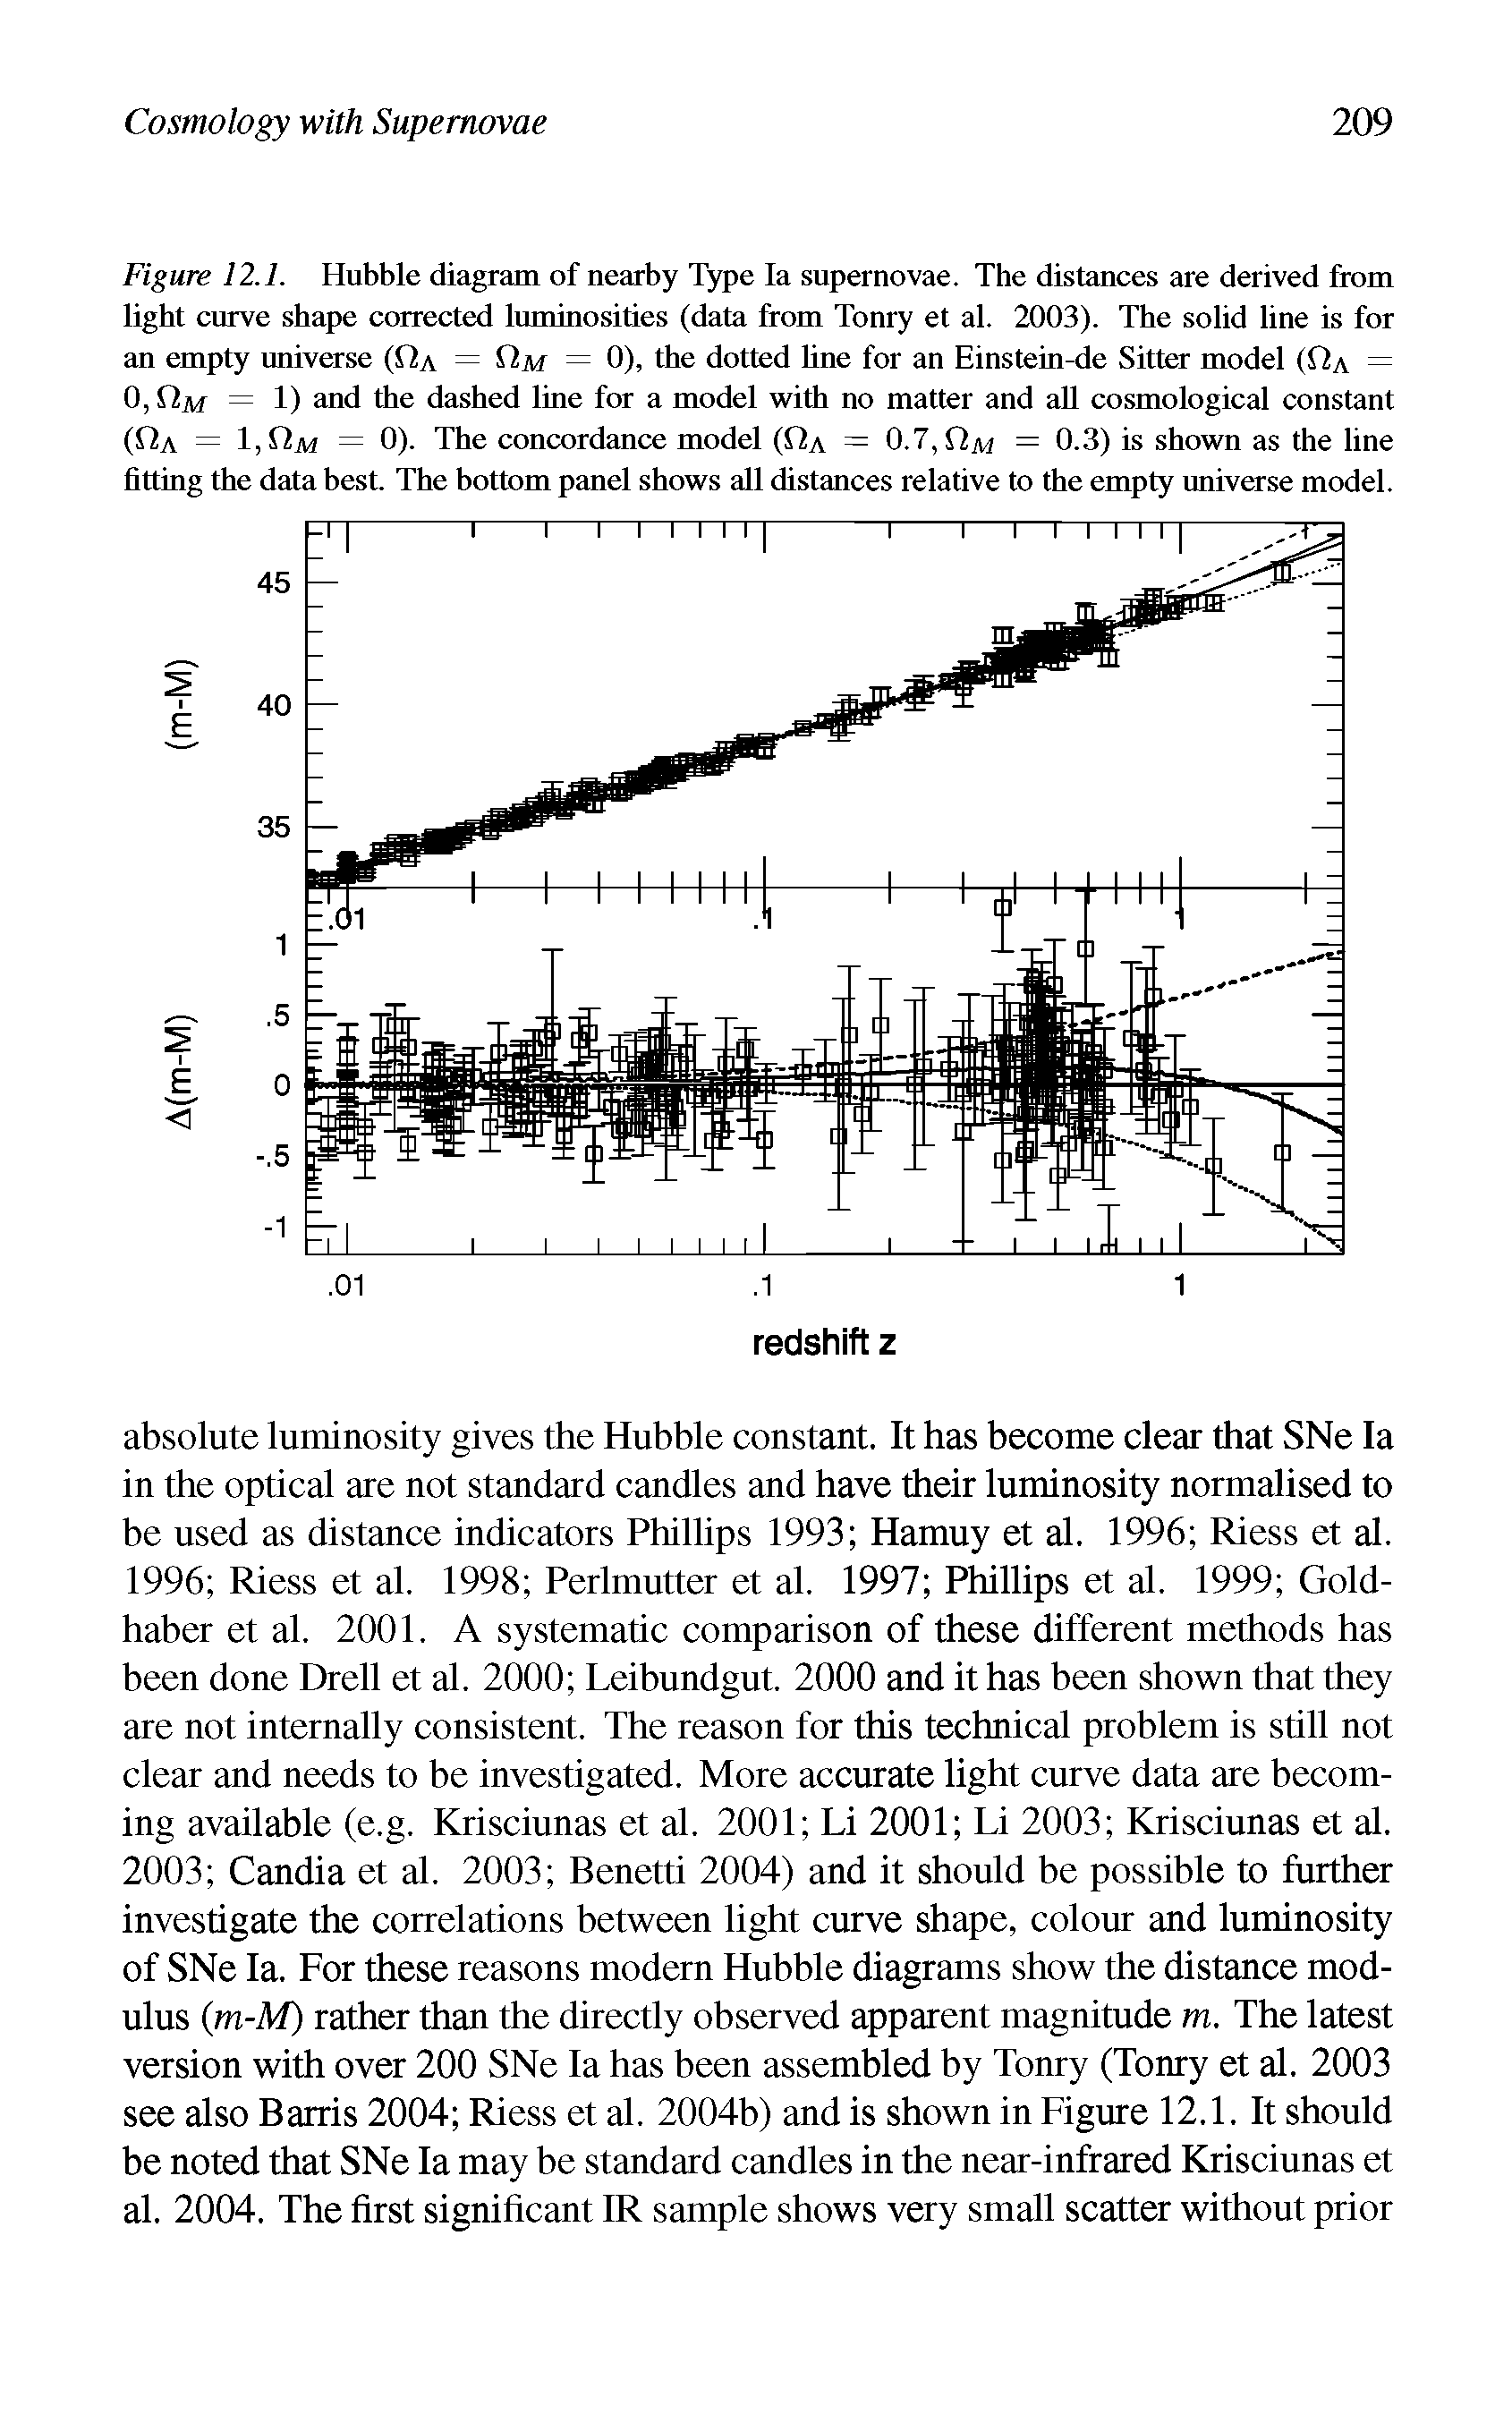 Figure 12.1. Hubble diagram of nearby Type la supernovae. The distances are derived from light curve shape corrected luminosities (data from Tonry et al. 2003). The solid line is for an empty universe (Qa = Ojh = 0), the dotted line for an Einstein-de Sitter model (Qa = 0, Hm = 1) and the dashed line for a model with no matter and all cosmological constant (Qa = 1,0 1 = 0). The concordance model (Qa = 0.7, Qaj = 0.3) is shown as the line fitting the data best. The bottom panel shows all distances relative to the empty universe model.